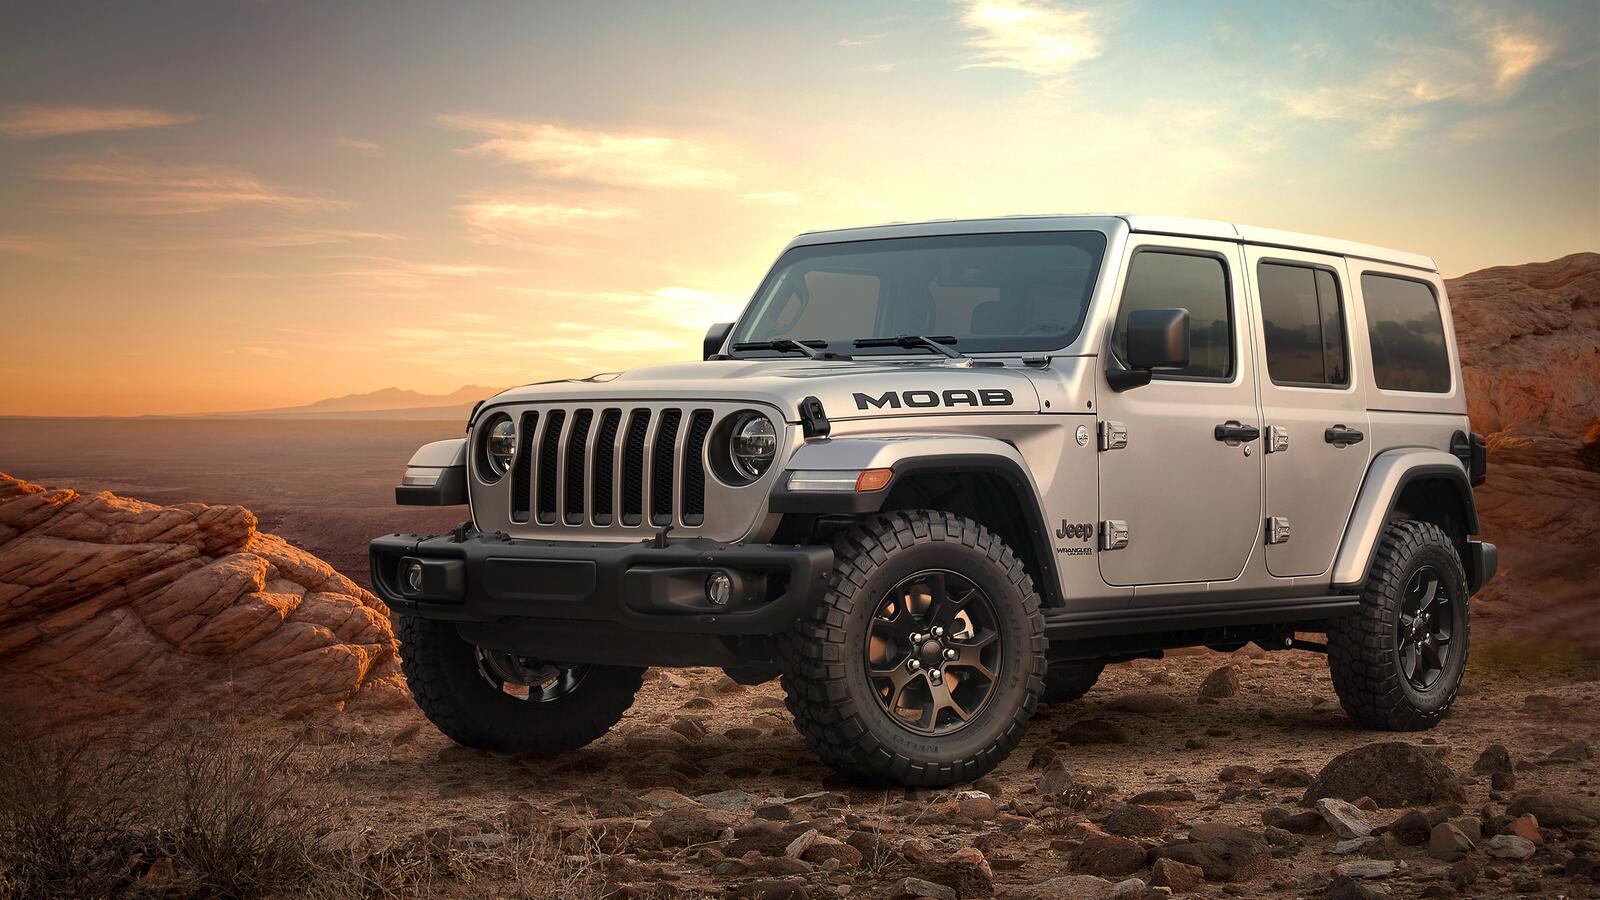 Free photo Jeep wrangler unlimited moab edition in mountainous terrain